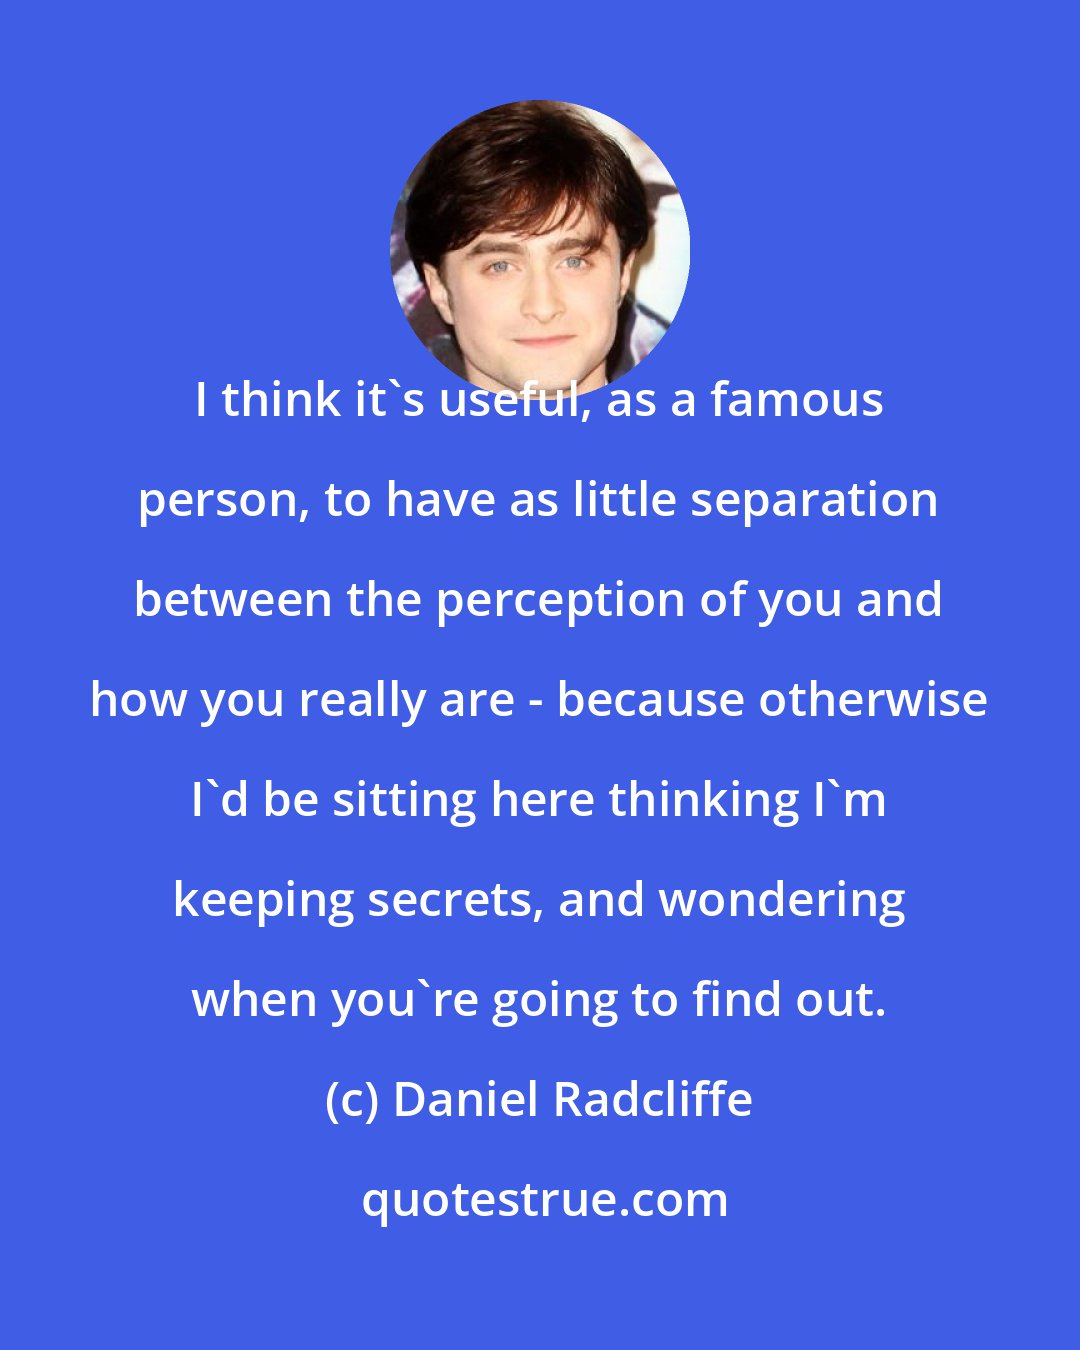 Daniel Radcliffe: I think it's useful, as a famous person, to have as little separation between the perception of you and how you really are - because otherwise I'd be sitting here thinking I'm keeping secrets, and wondering when you're going to find out.